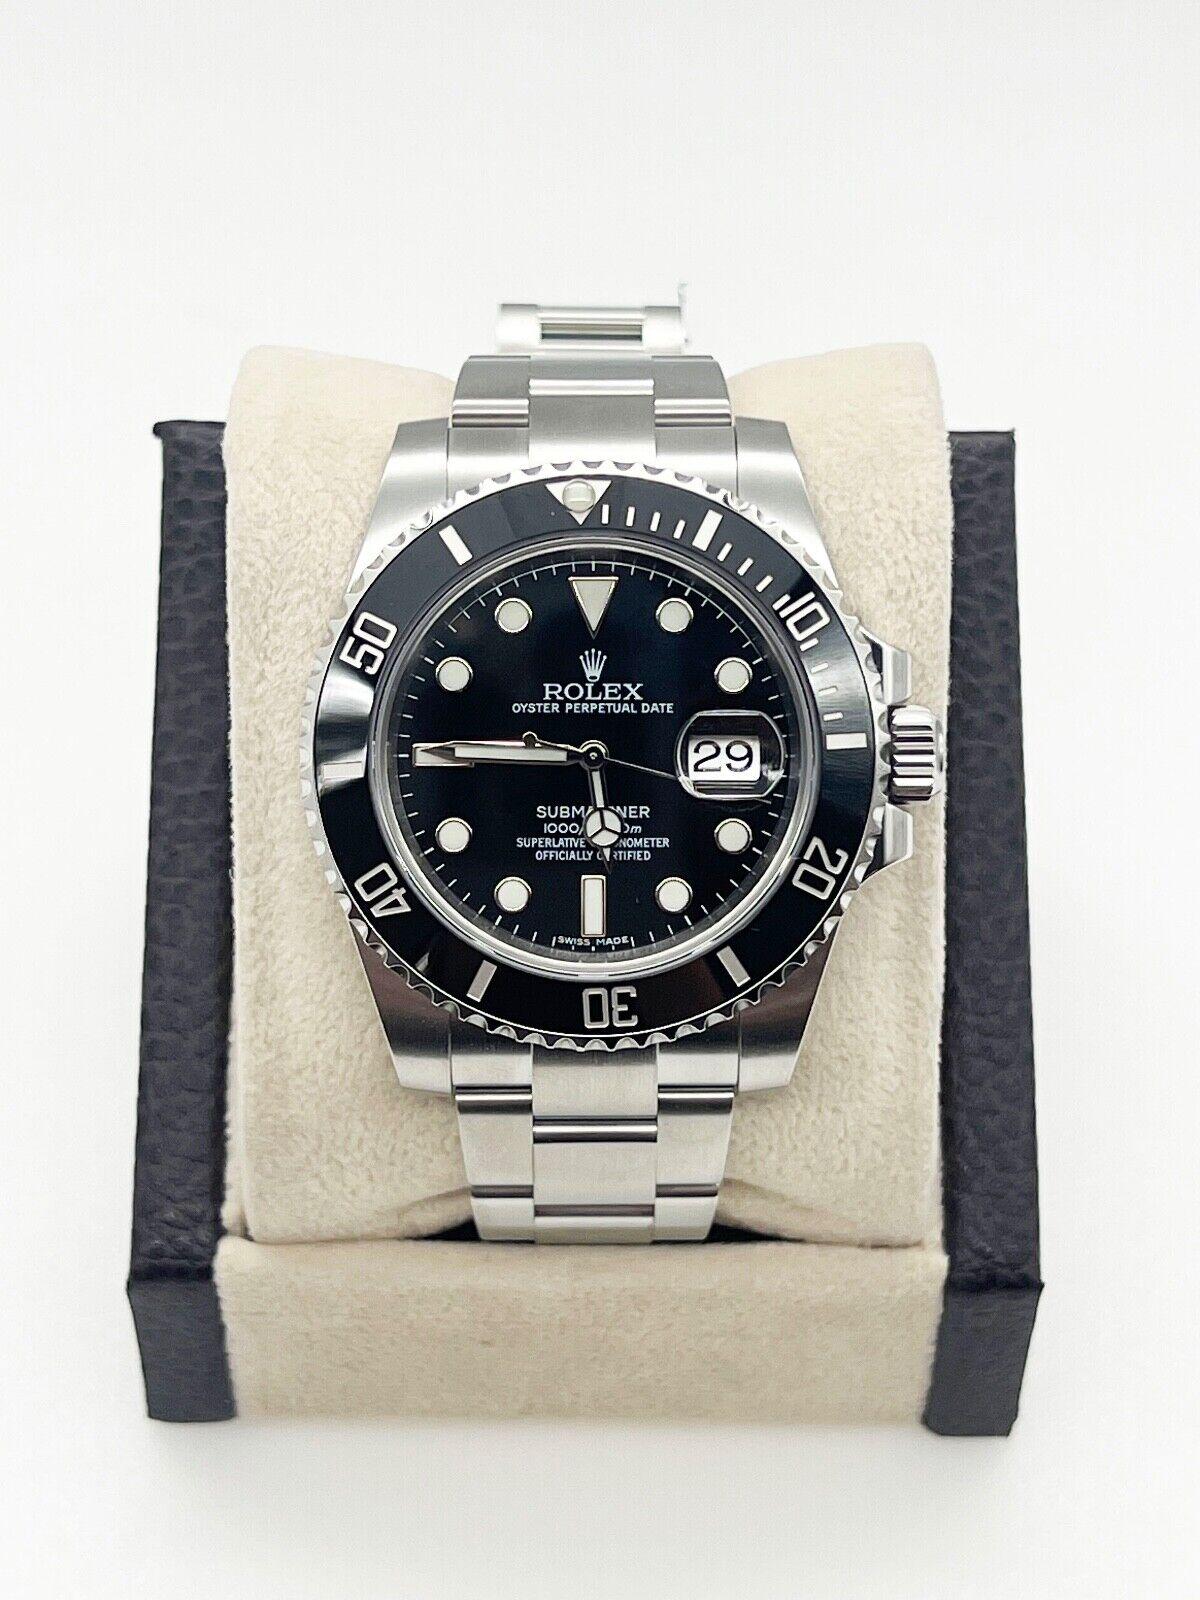 Rolex Submariner 116610 Black Ceramic Stainless Box Paper 2016 In Excellent Condition For Sale In San Diego, CA